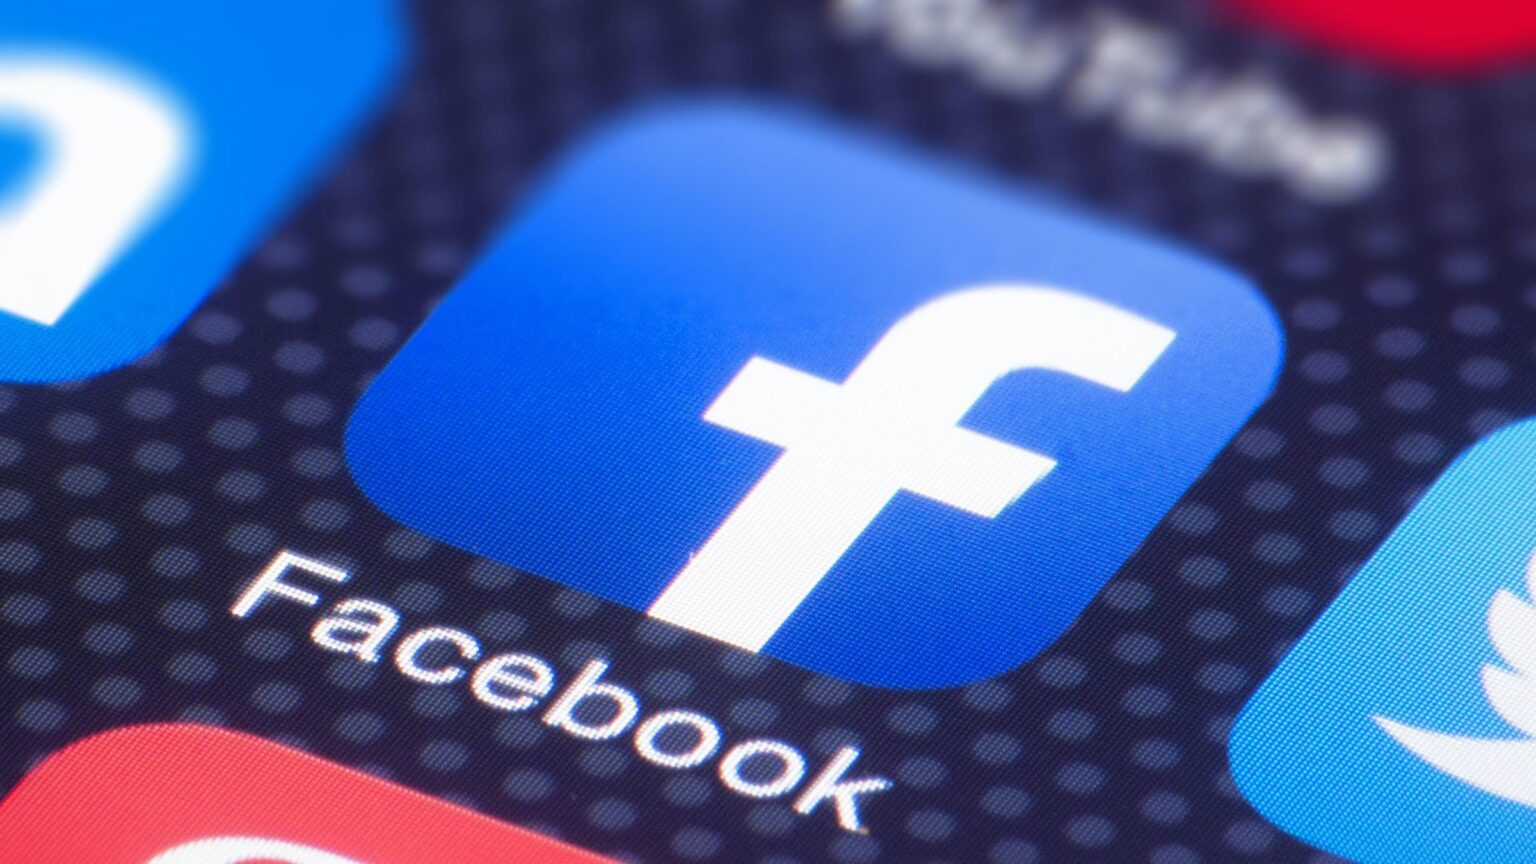 Is Facebook finally busting fake pages on its platform? Find out the latest measures Facebook is taking against fake news.